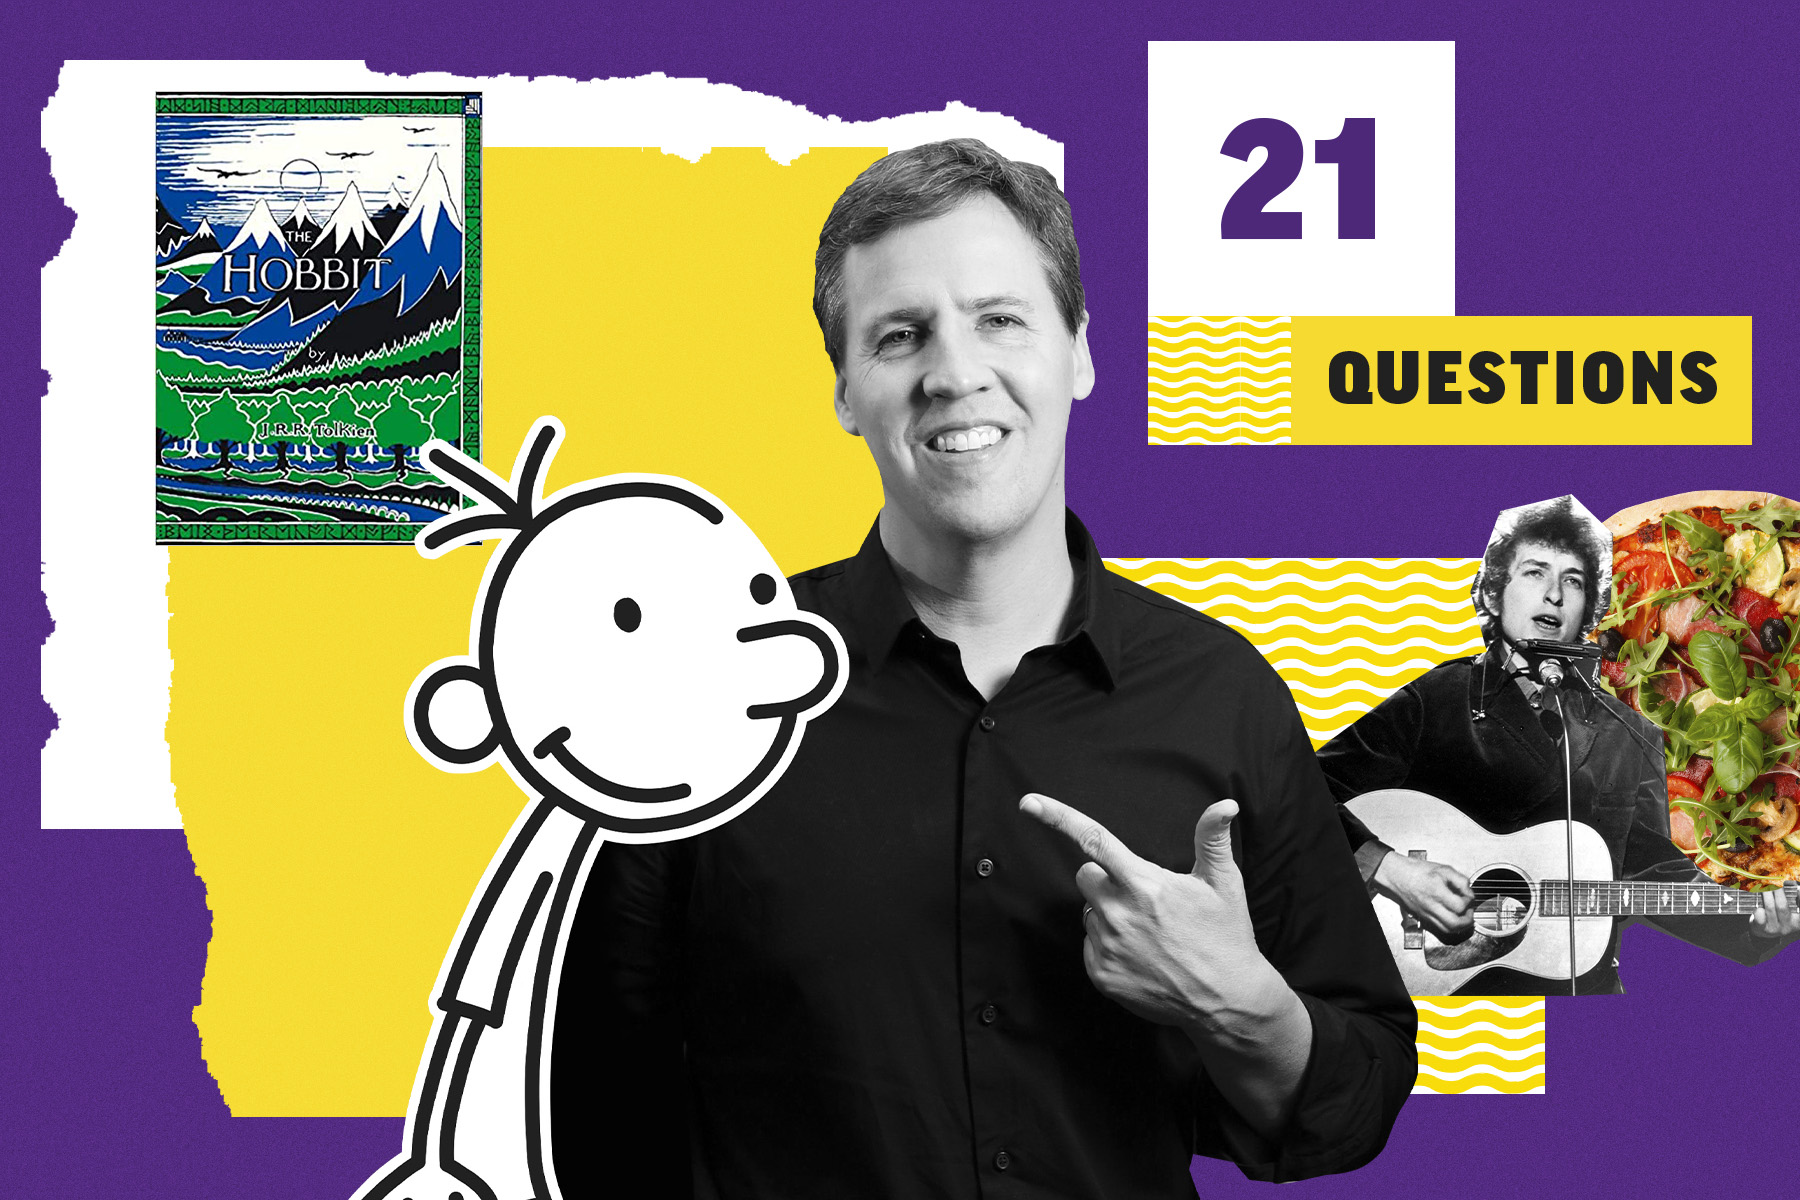 Image of author Jeff Kinney on a yellow and purple background alongside a drawing of wimpy kid Greg Heffley, an image of Bob Dylan and pizza, and the book cover of The Hobbit by J. R. R. Tolkien